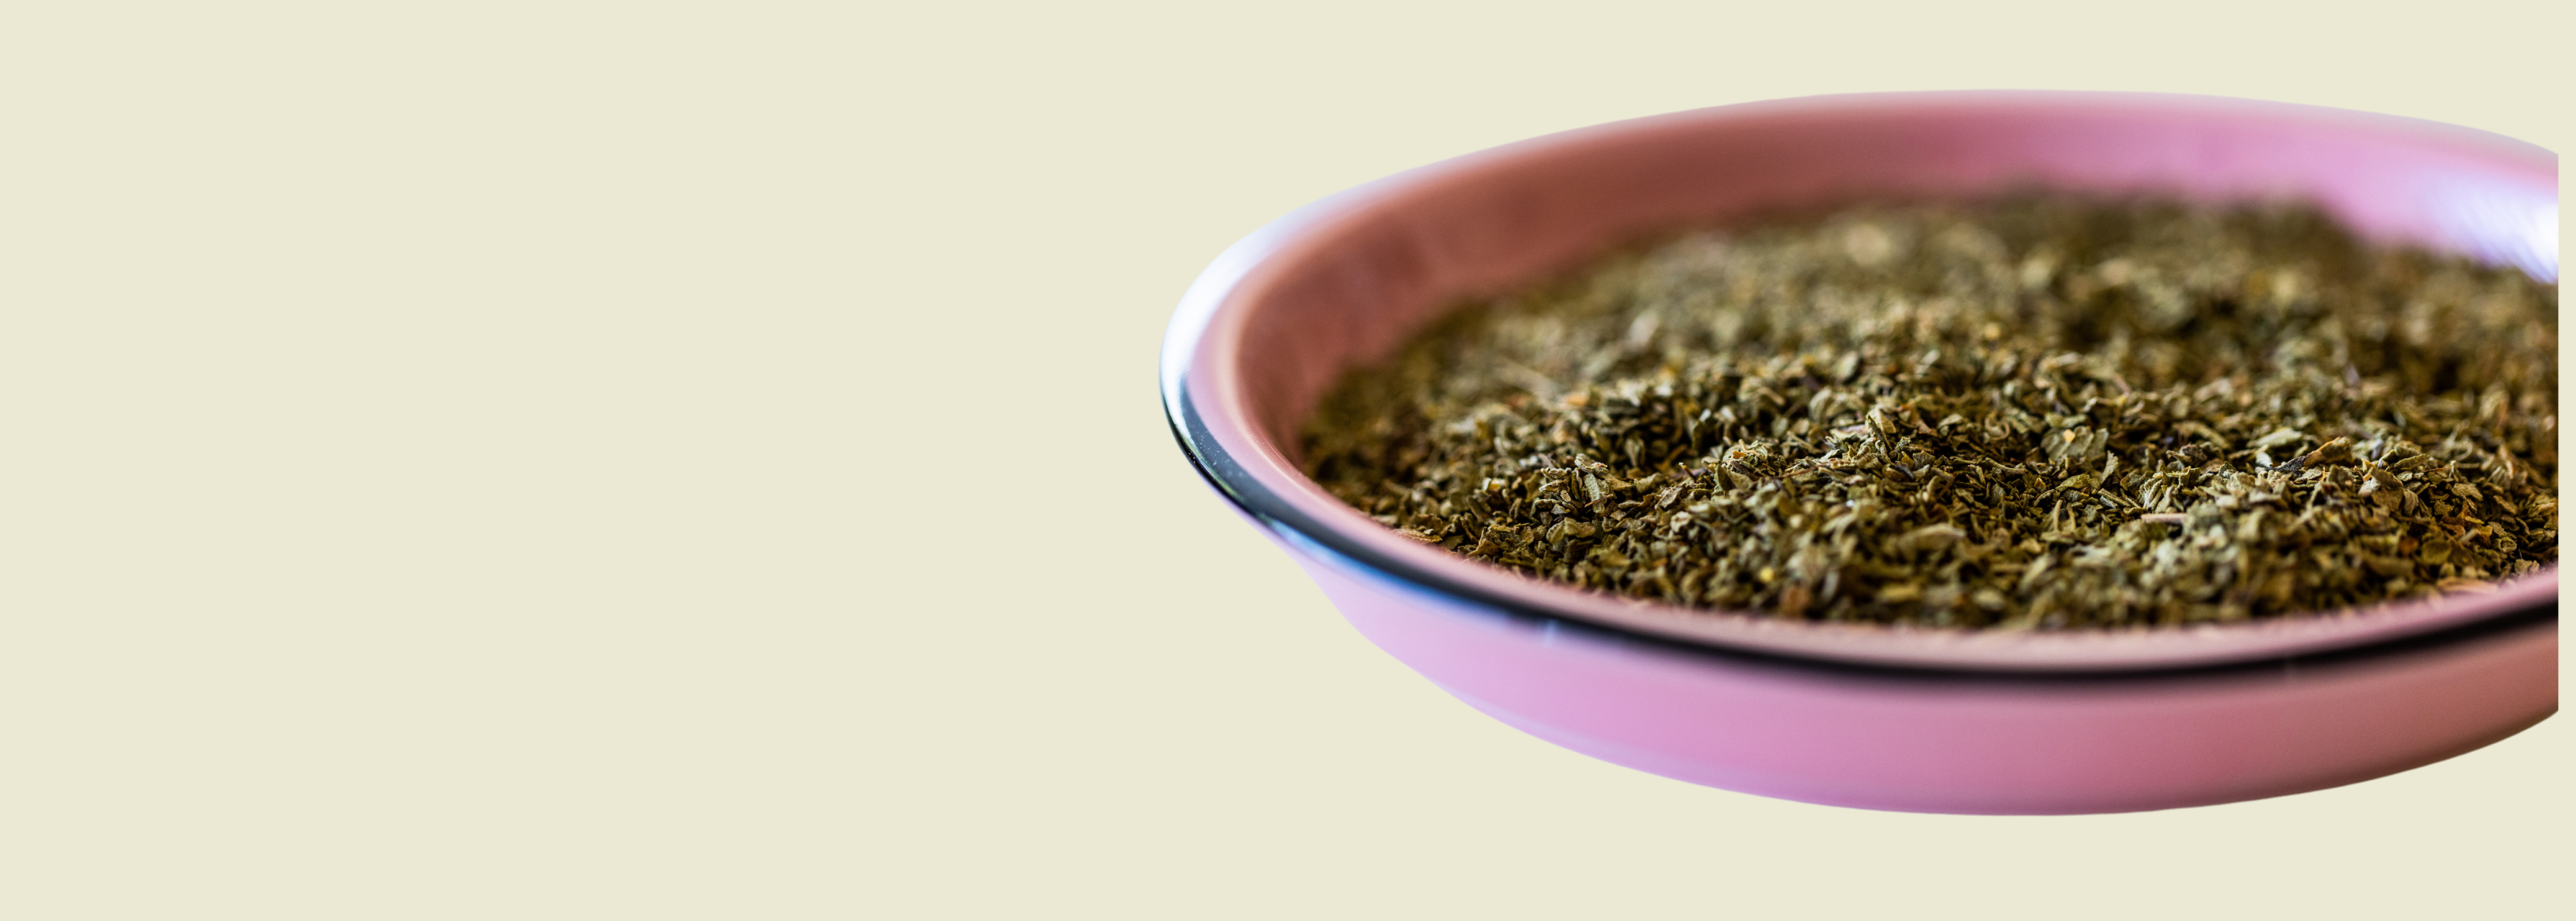 Herbs and Spices - banner image